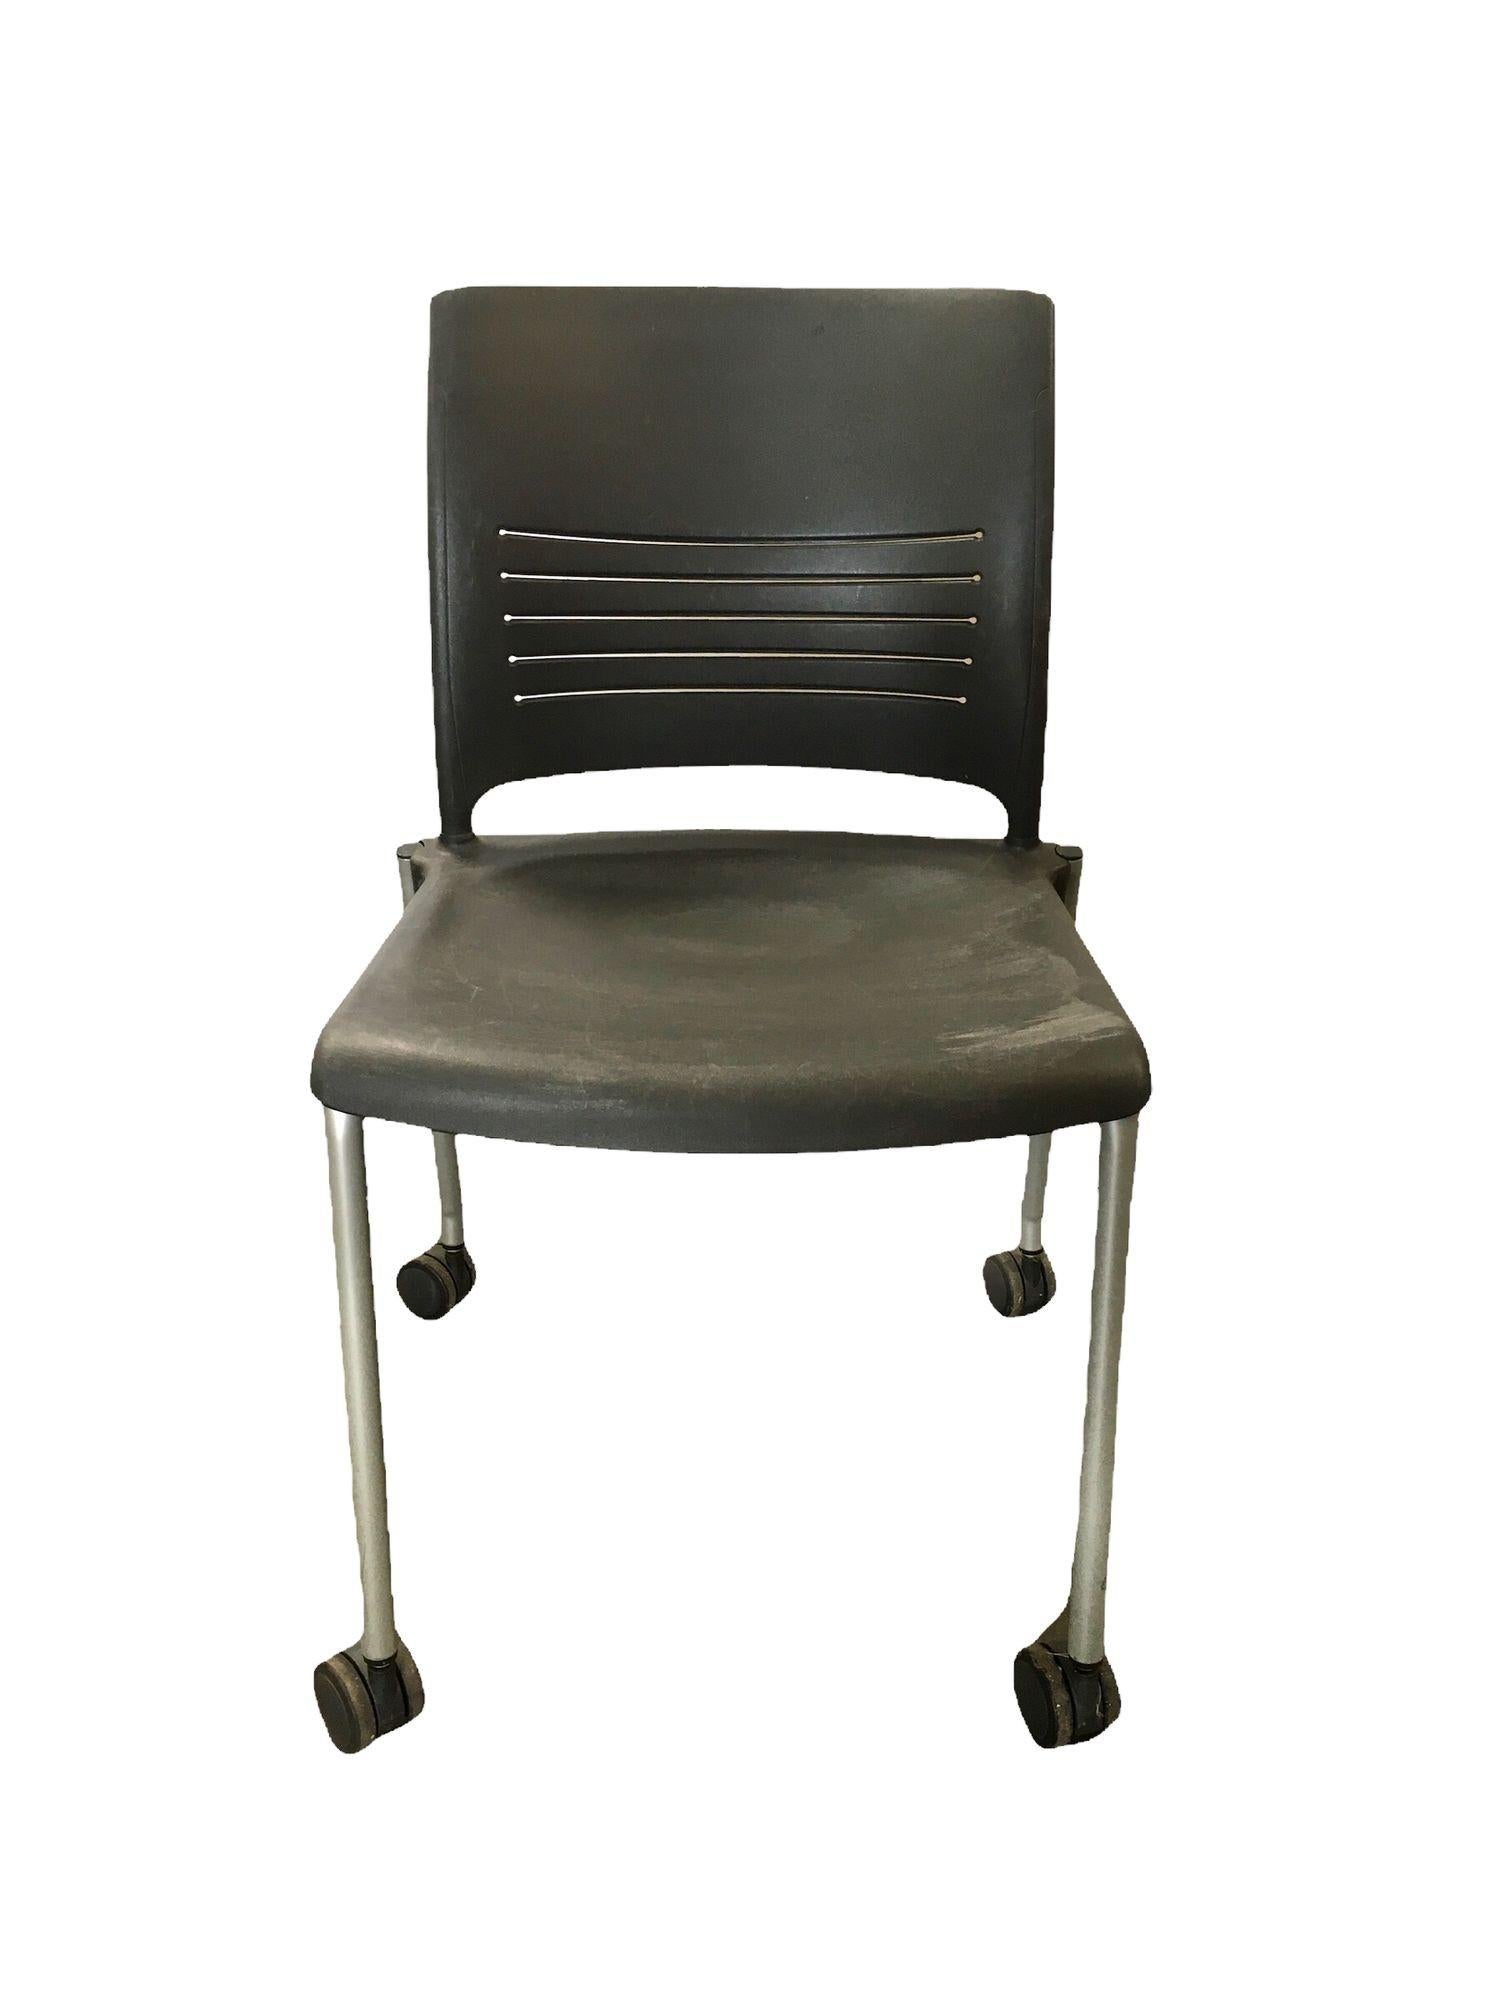 Vintage Dark Grey Plastic Rolling Desk Chairs by Giancarlo Piretti for Strive. These plastic chairs are easy to move around with the wheels on the bottom and can serve as desk chairs, waiting rooms, or even as additional seats for guests. They are